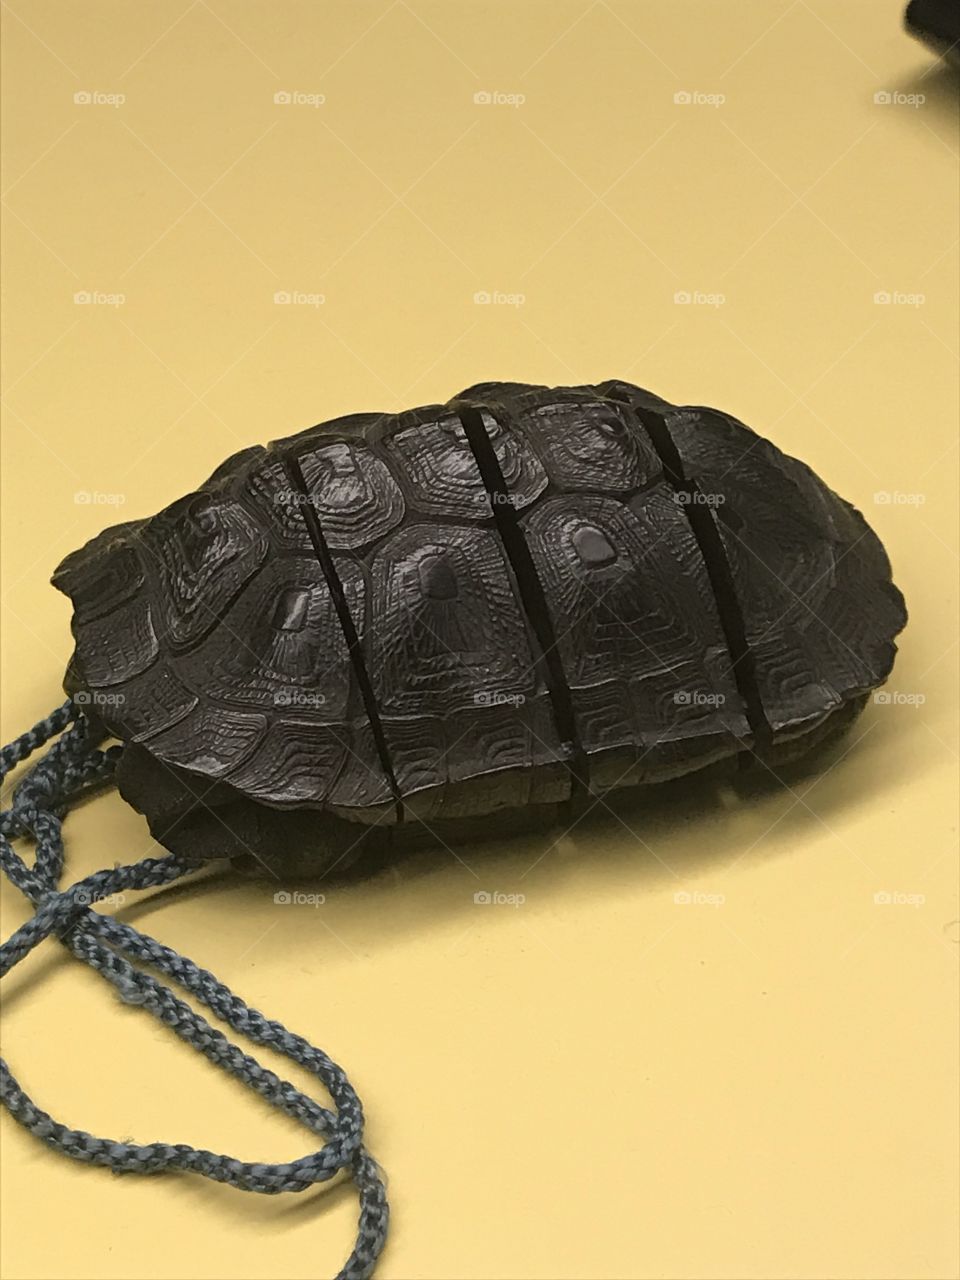 Small turtle carapace 